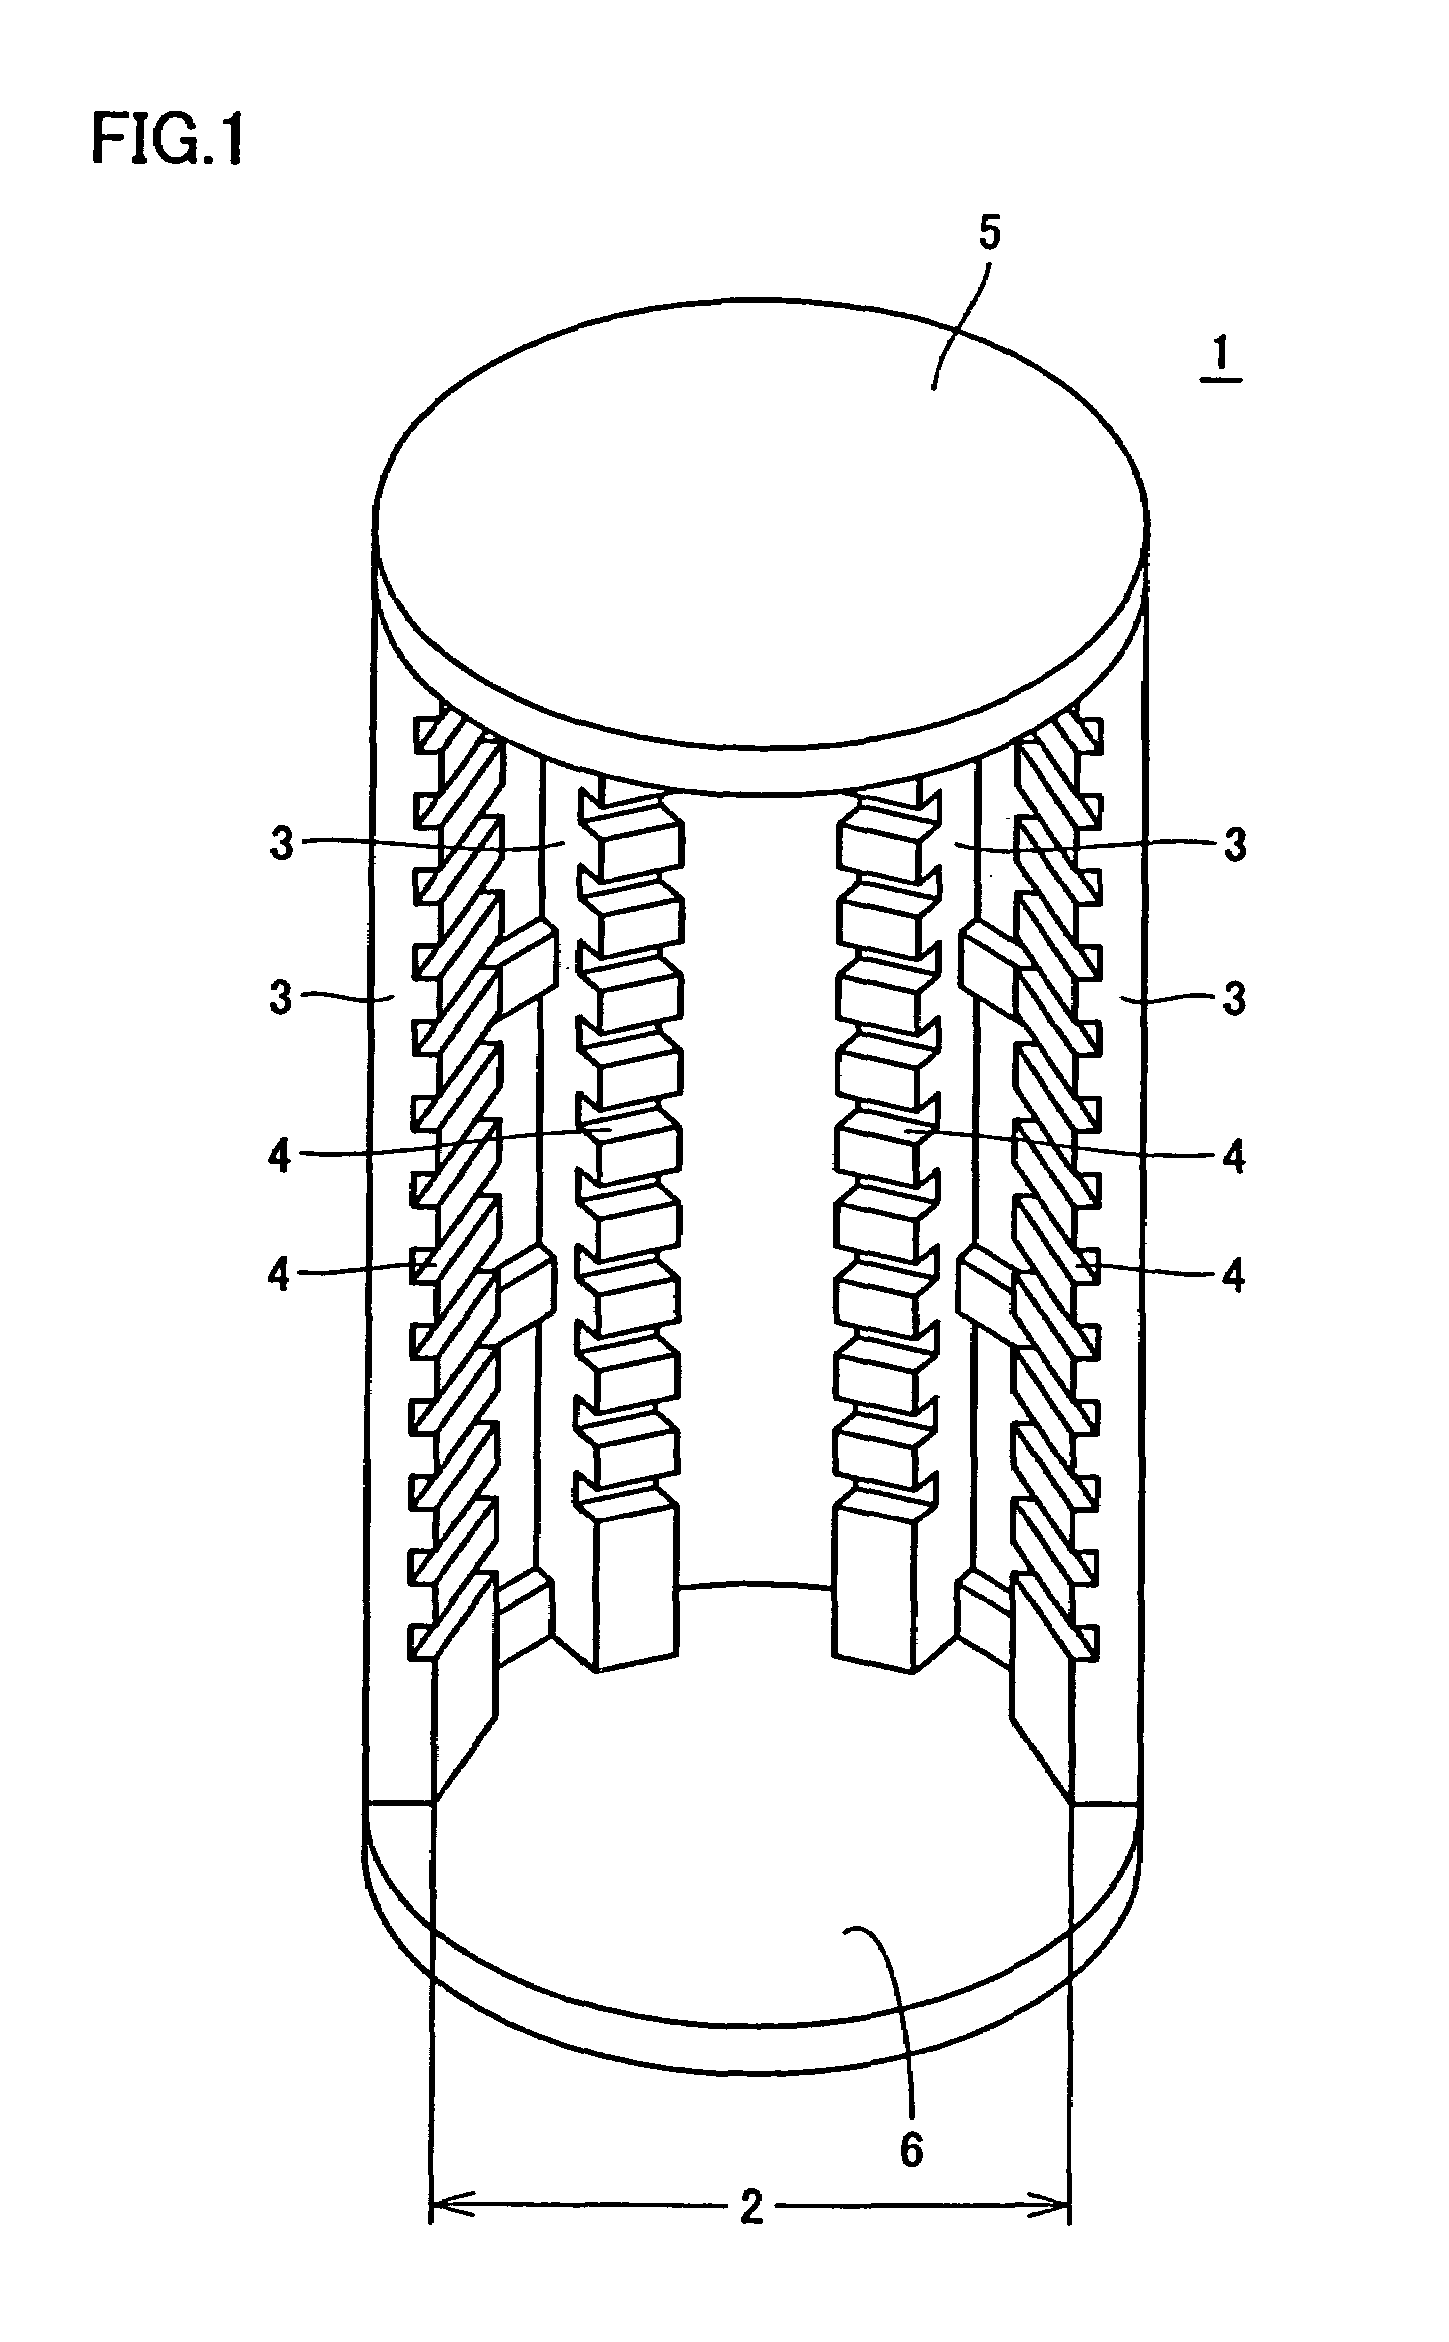 Heat treatment jig for semiconductor substrate